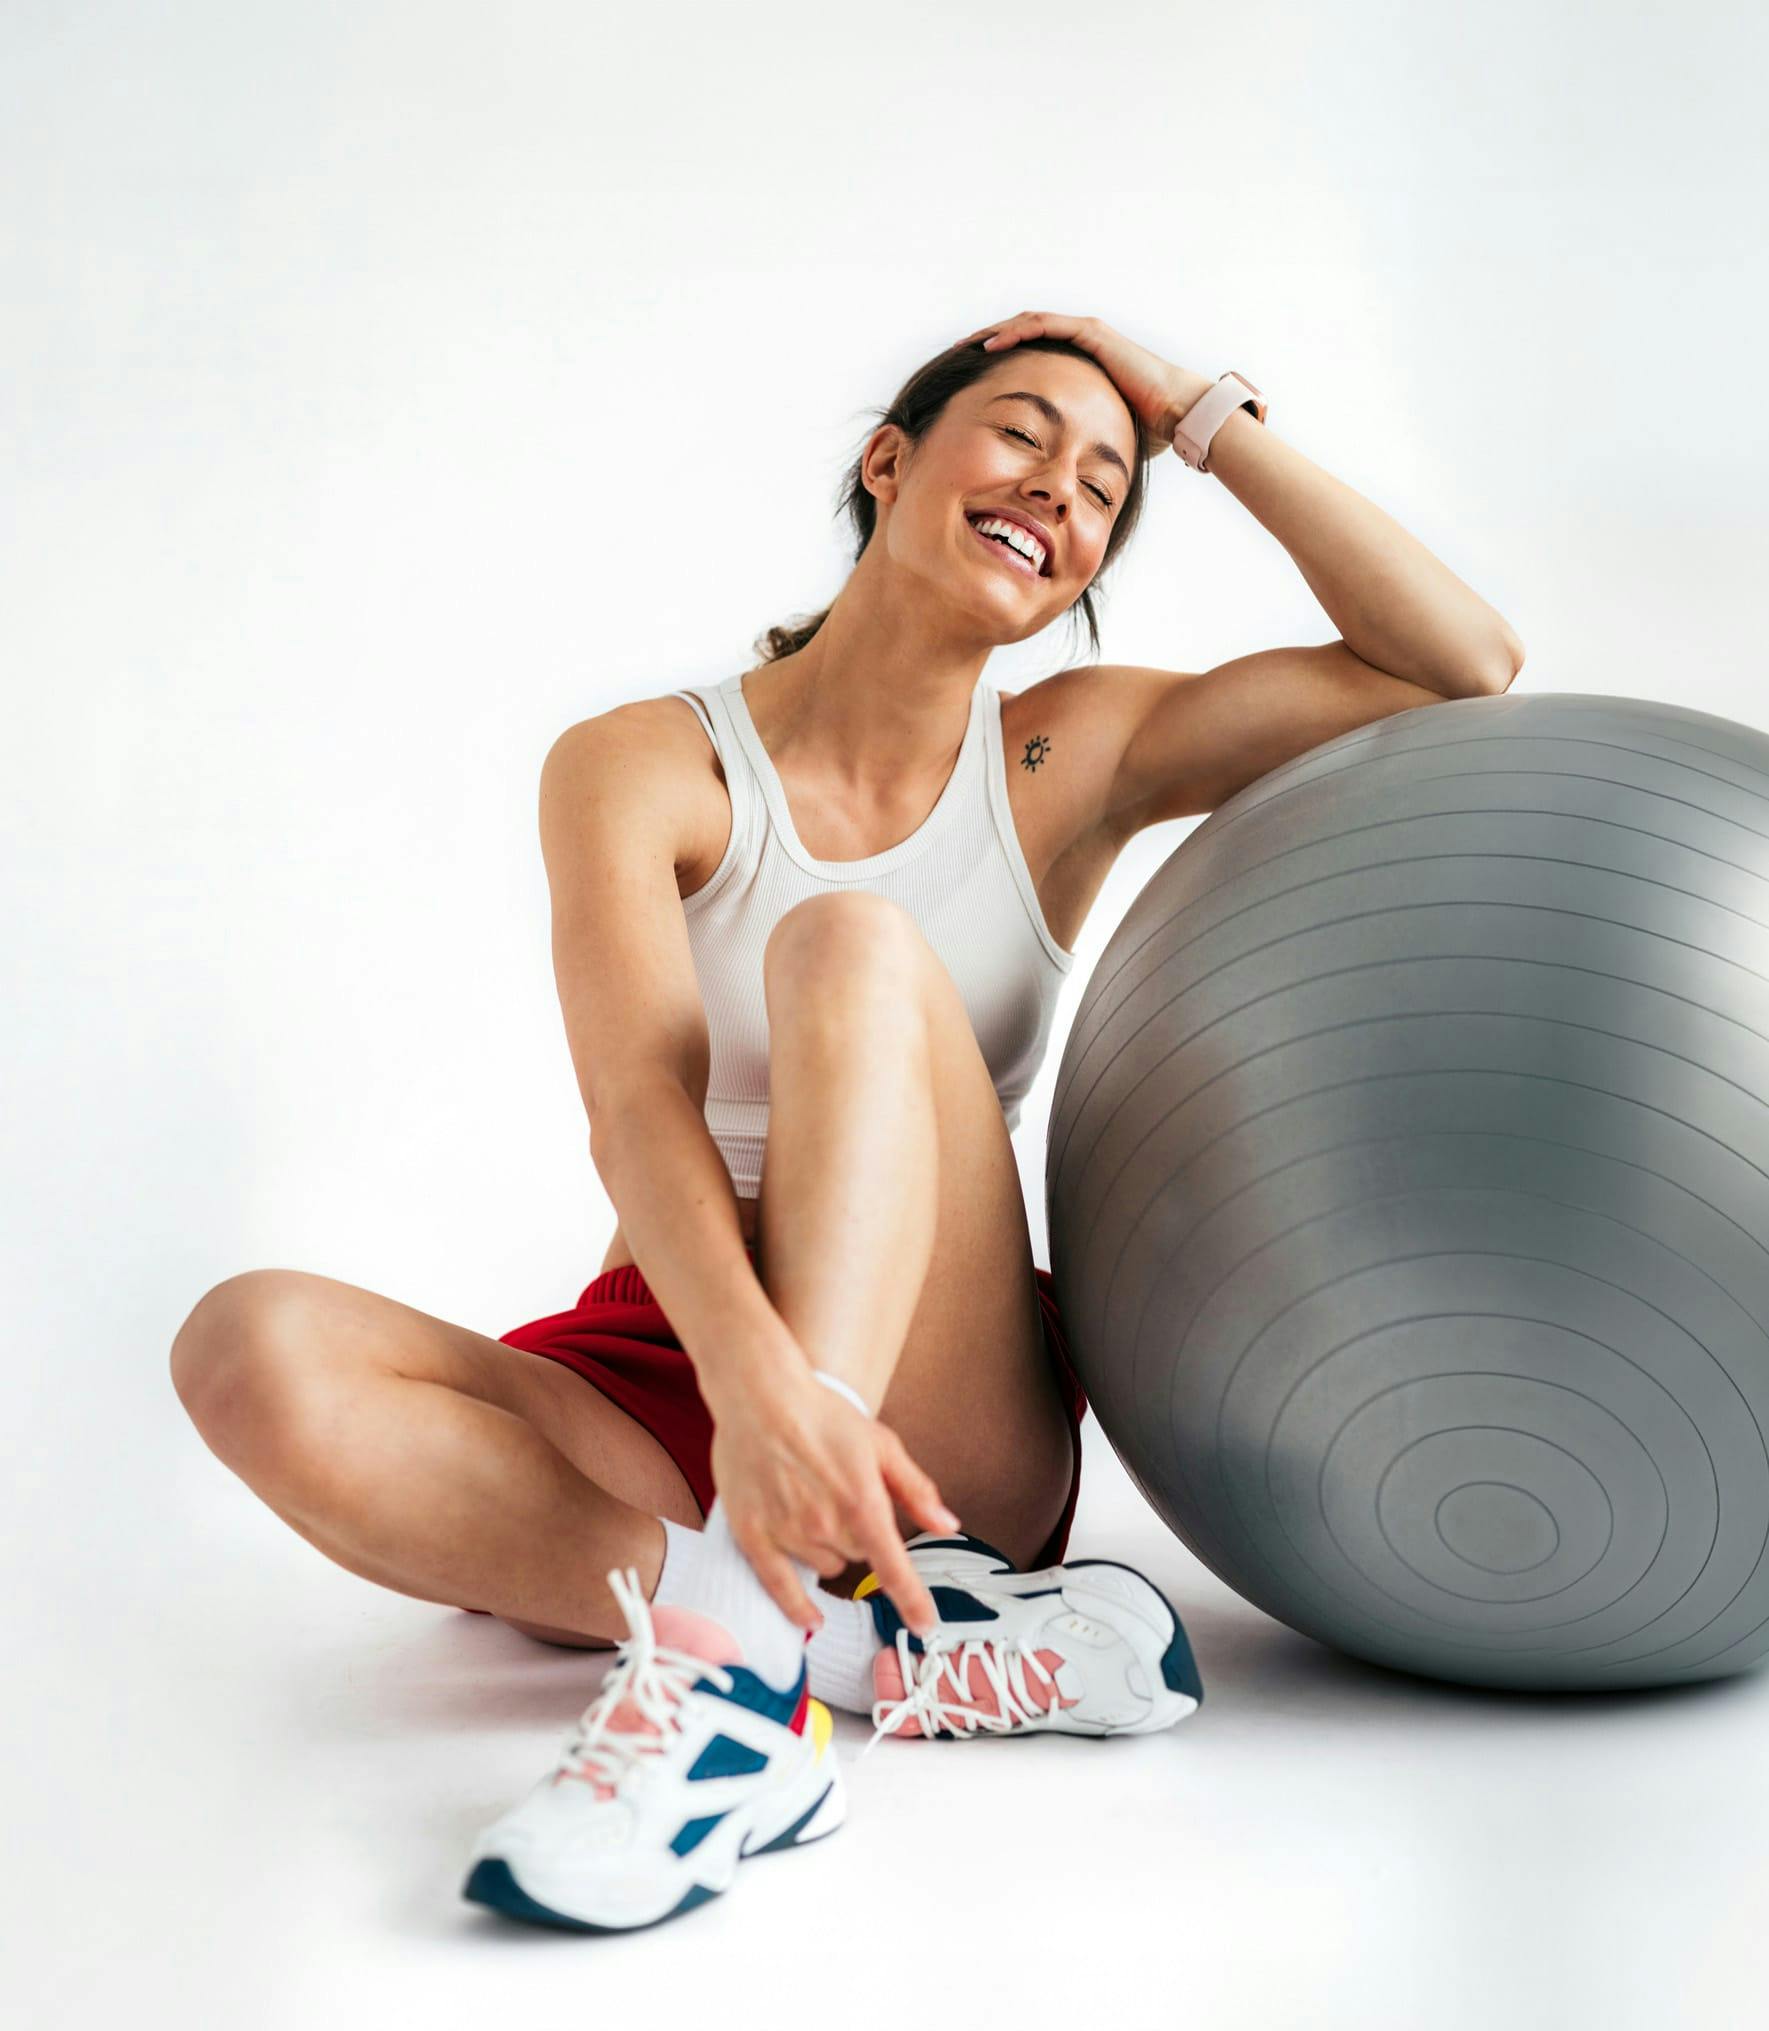 A woman in workout clothes sitting and smiling leaning into a workout ball